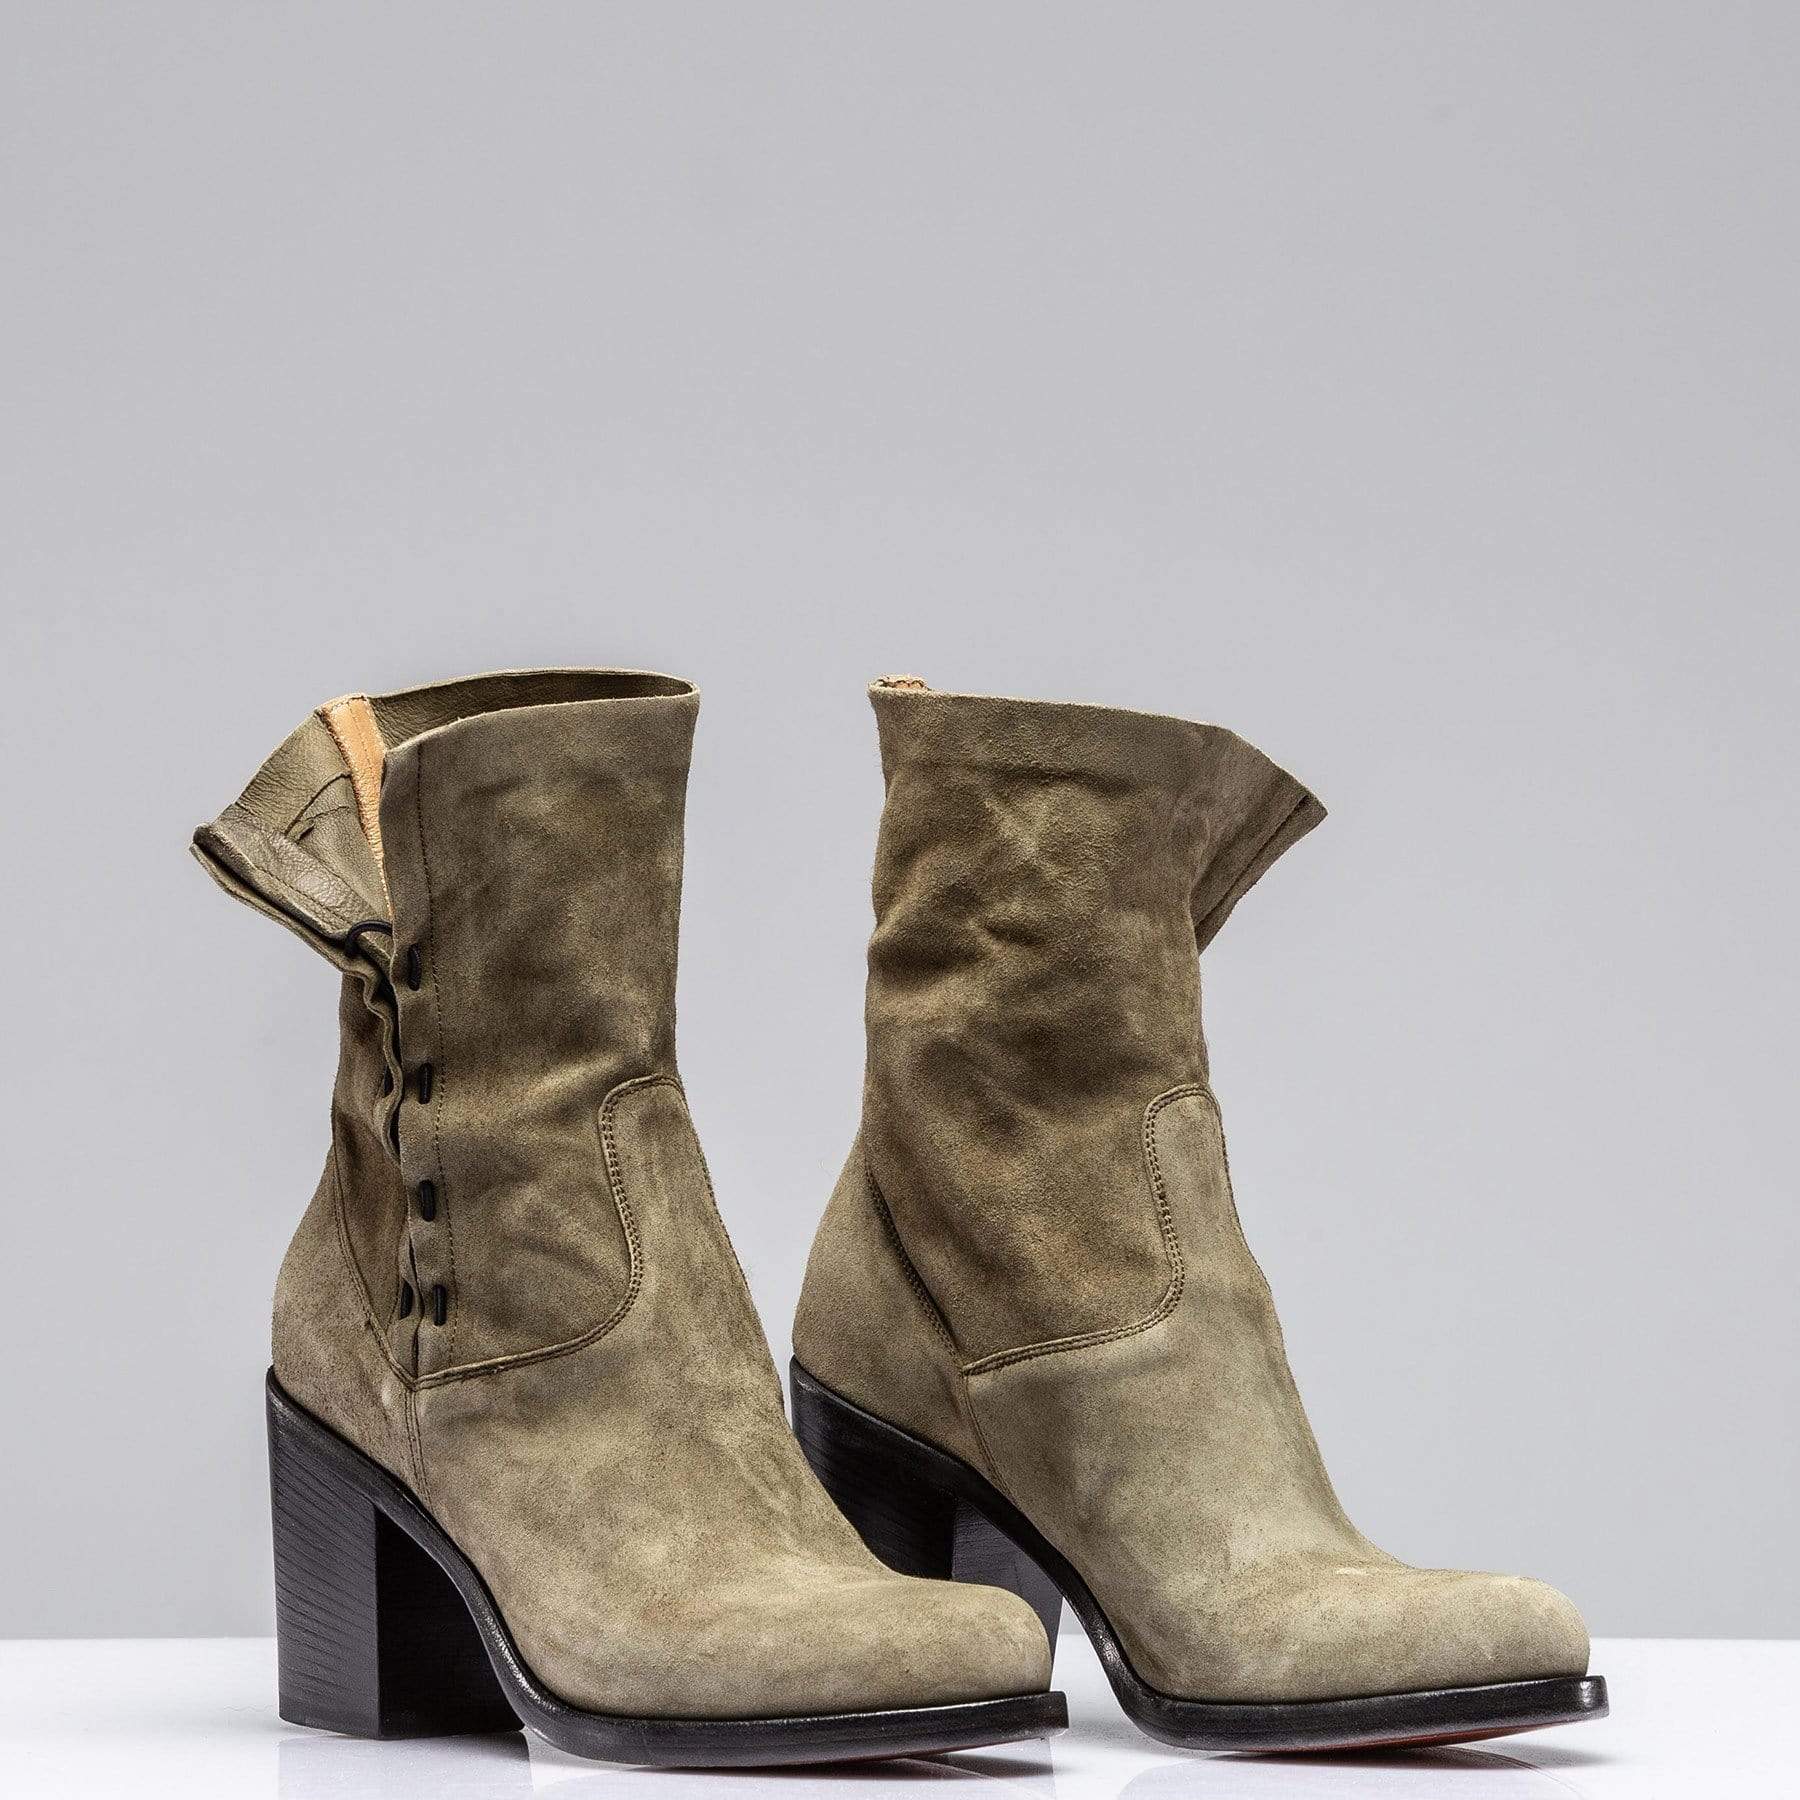 Lylita Low Boots - AXEL'S